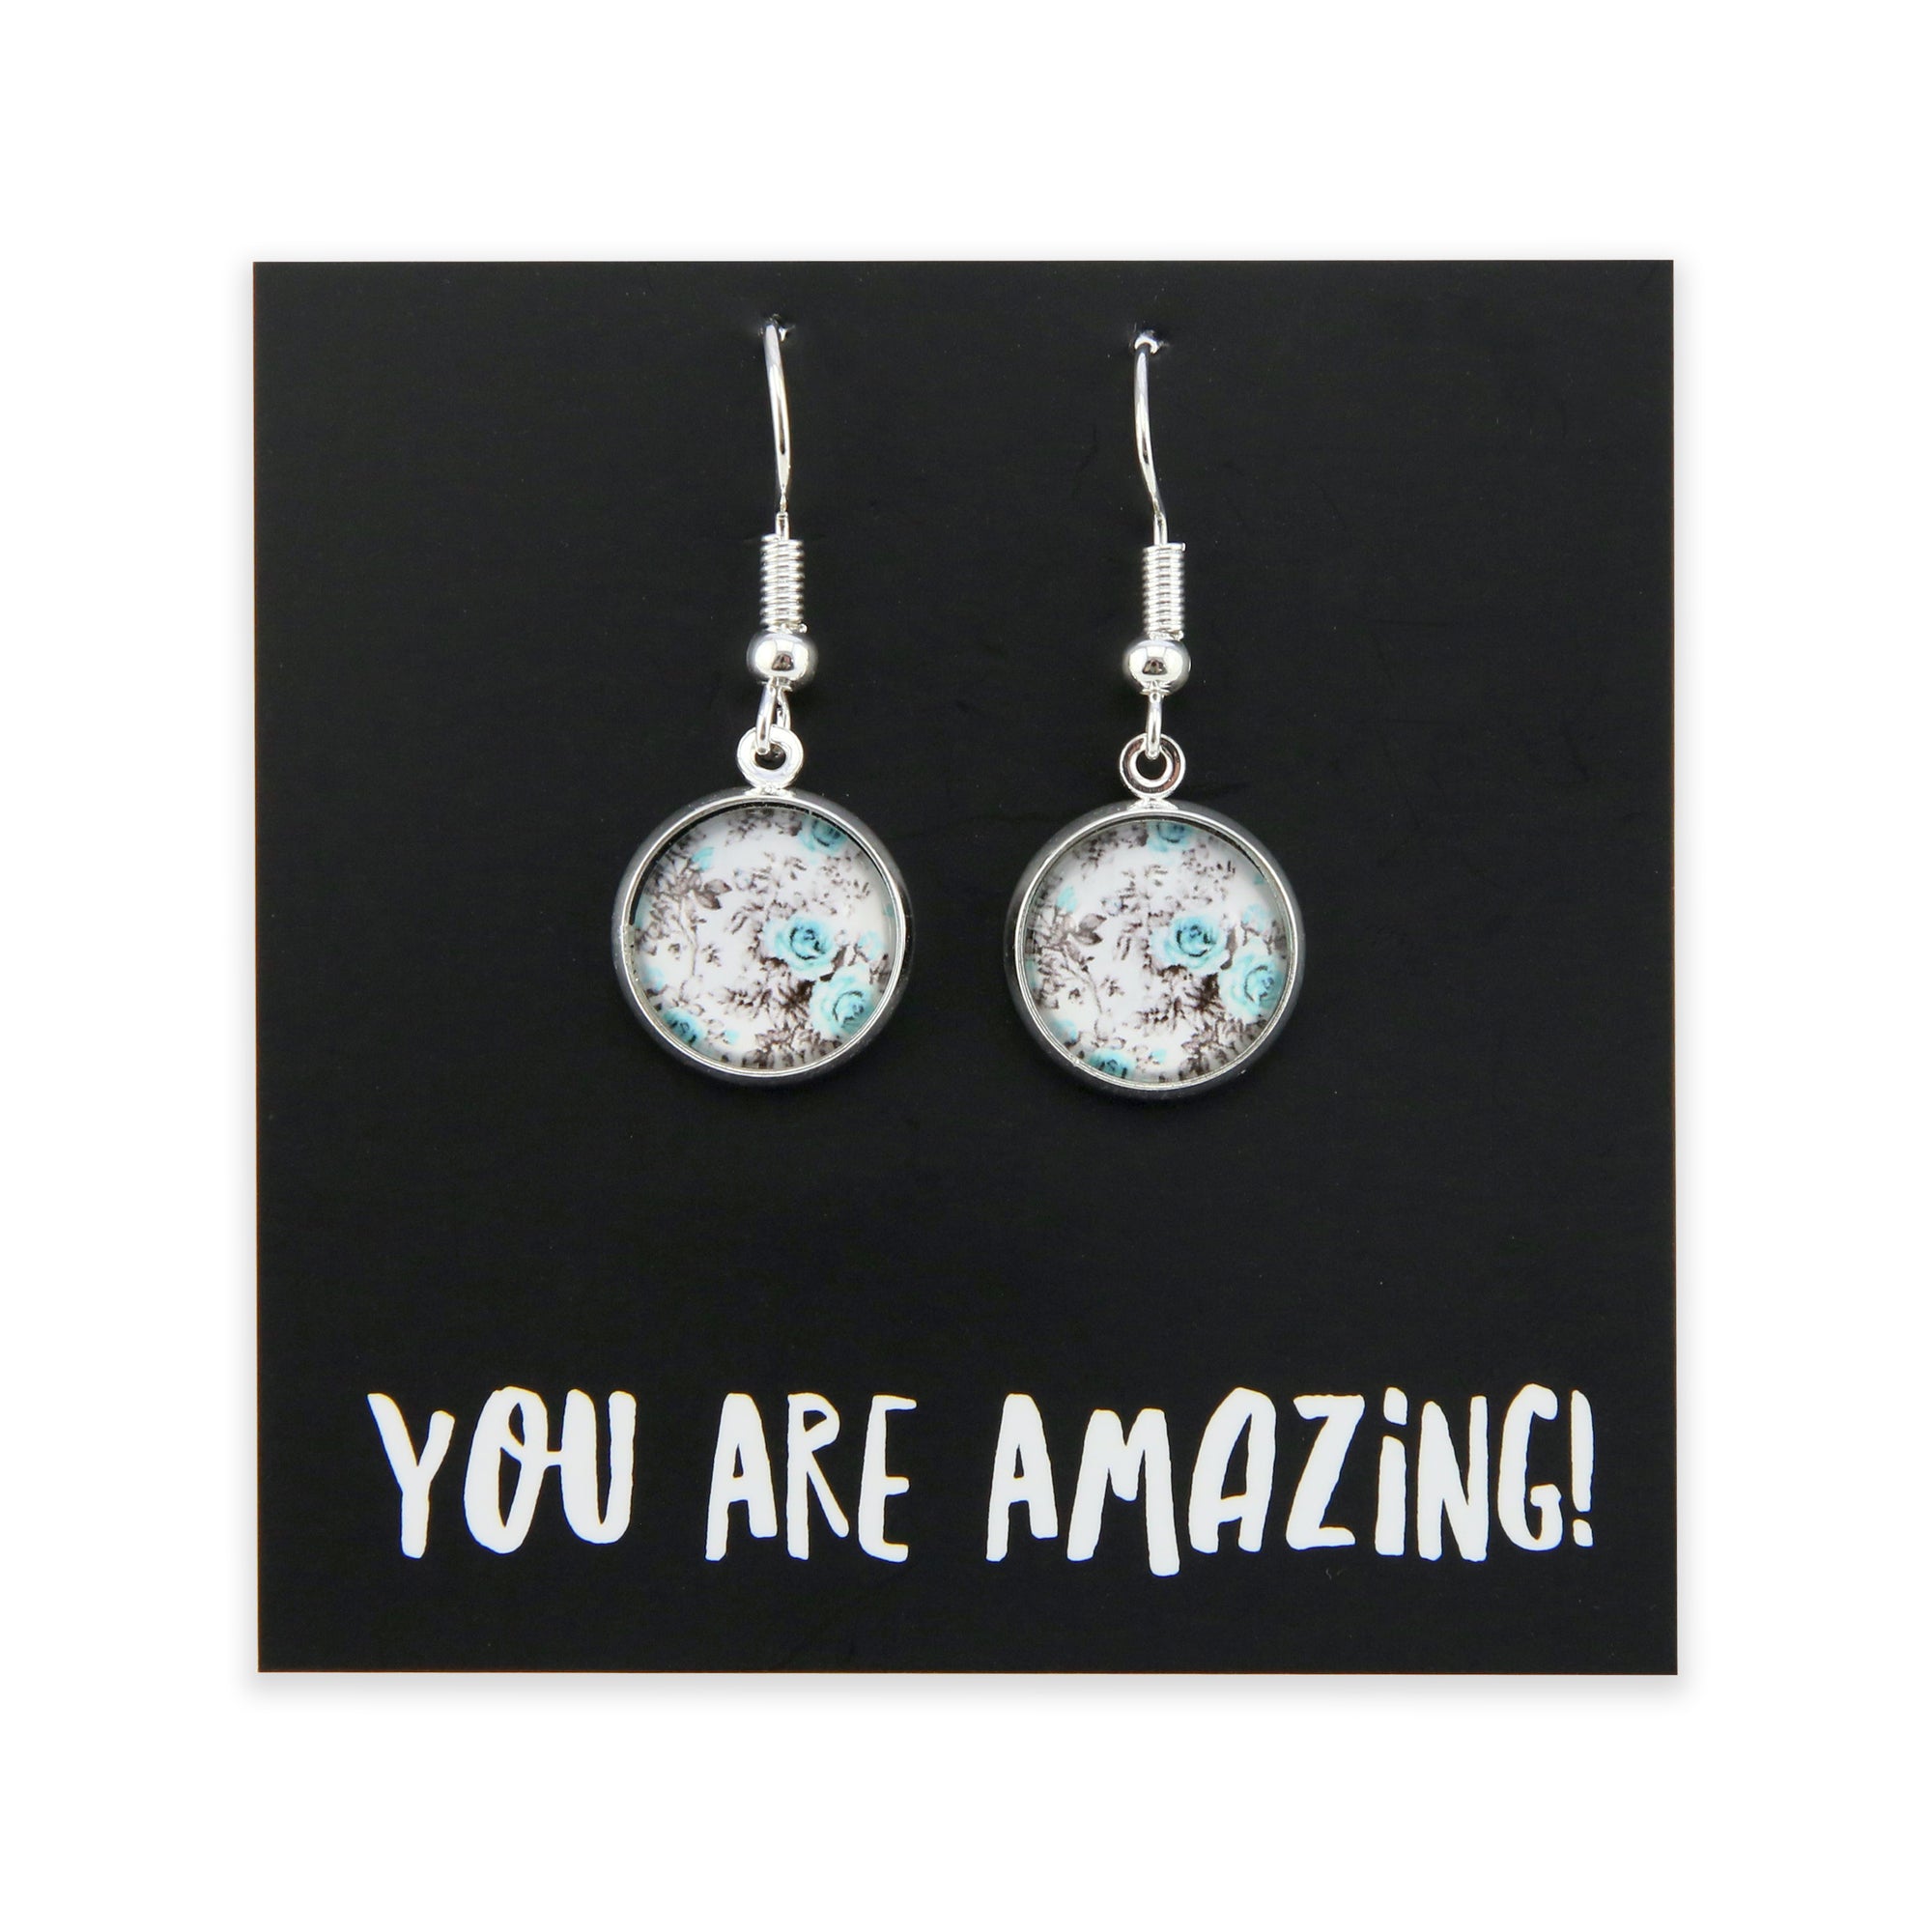 TEAL COLLECTION - You Are Amazing - Bright Silver Dangle Earrings - Aqua Bloom (12145)